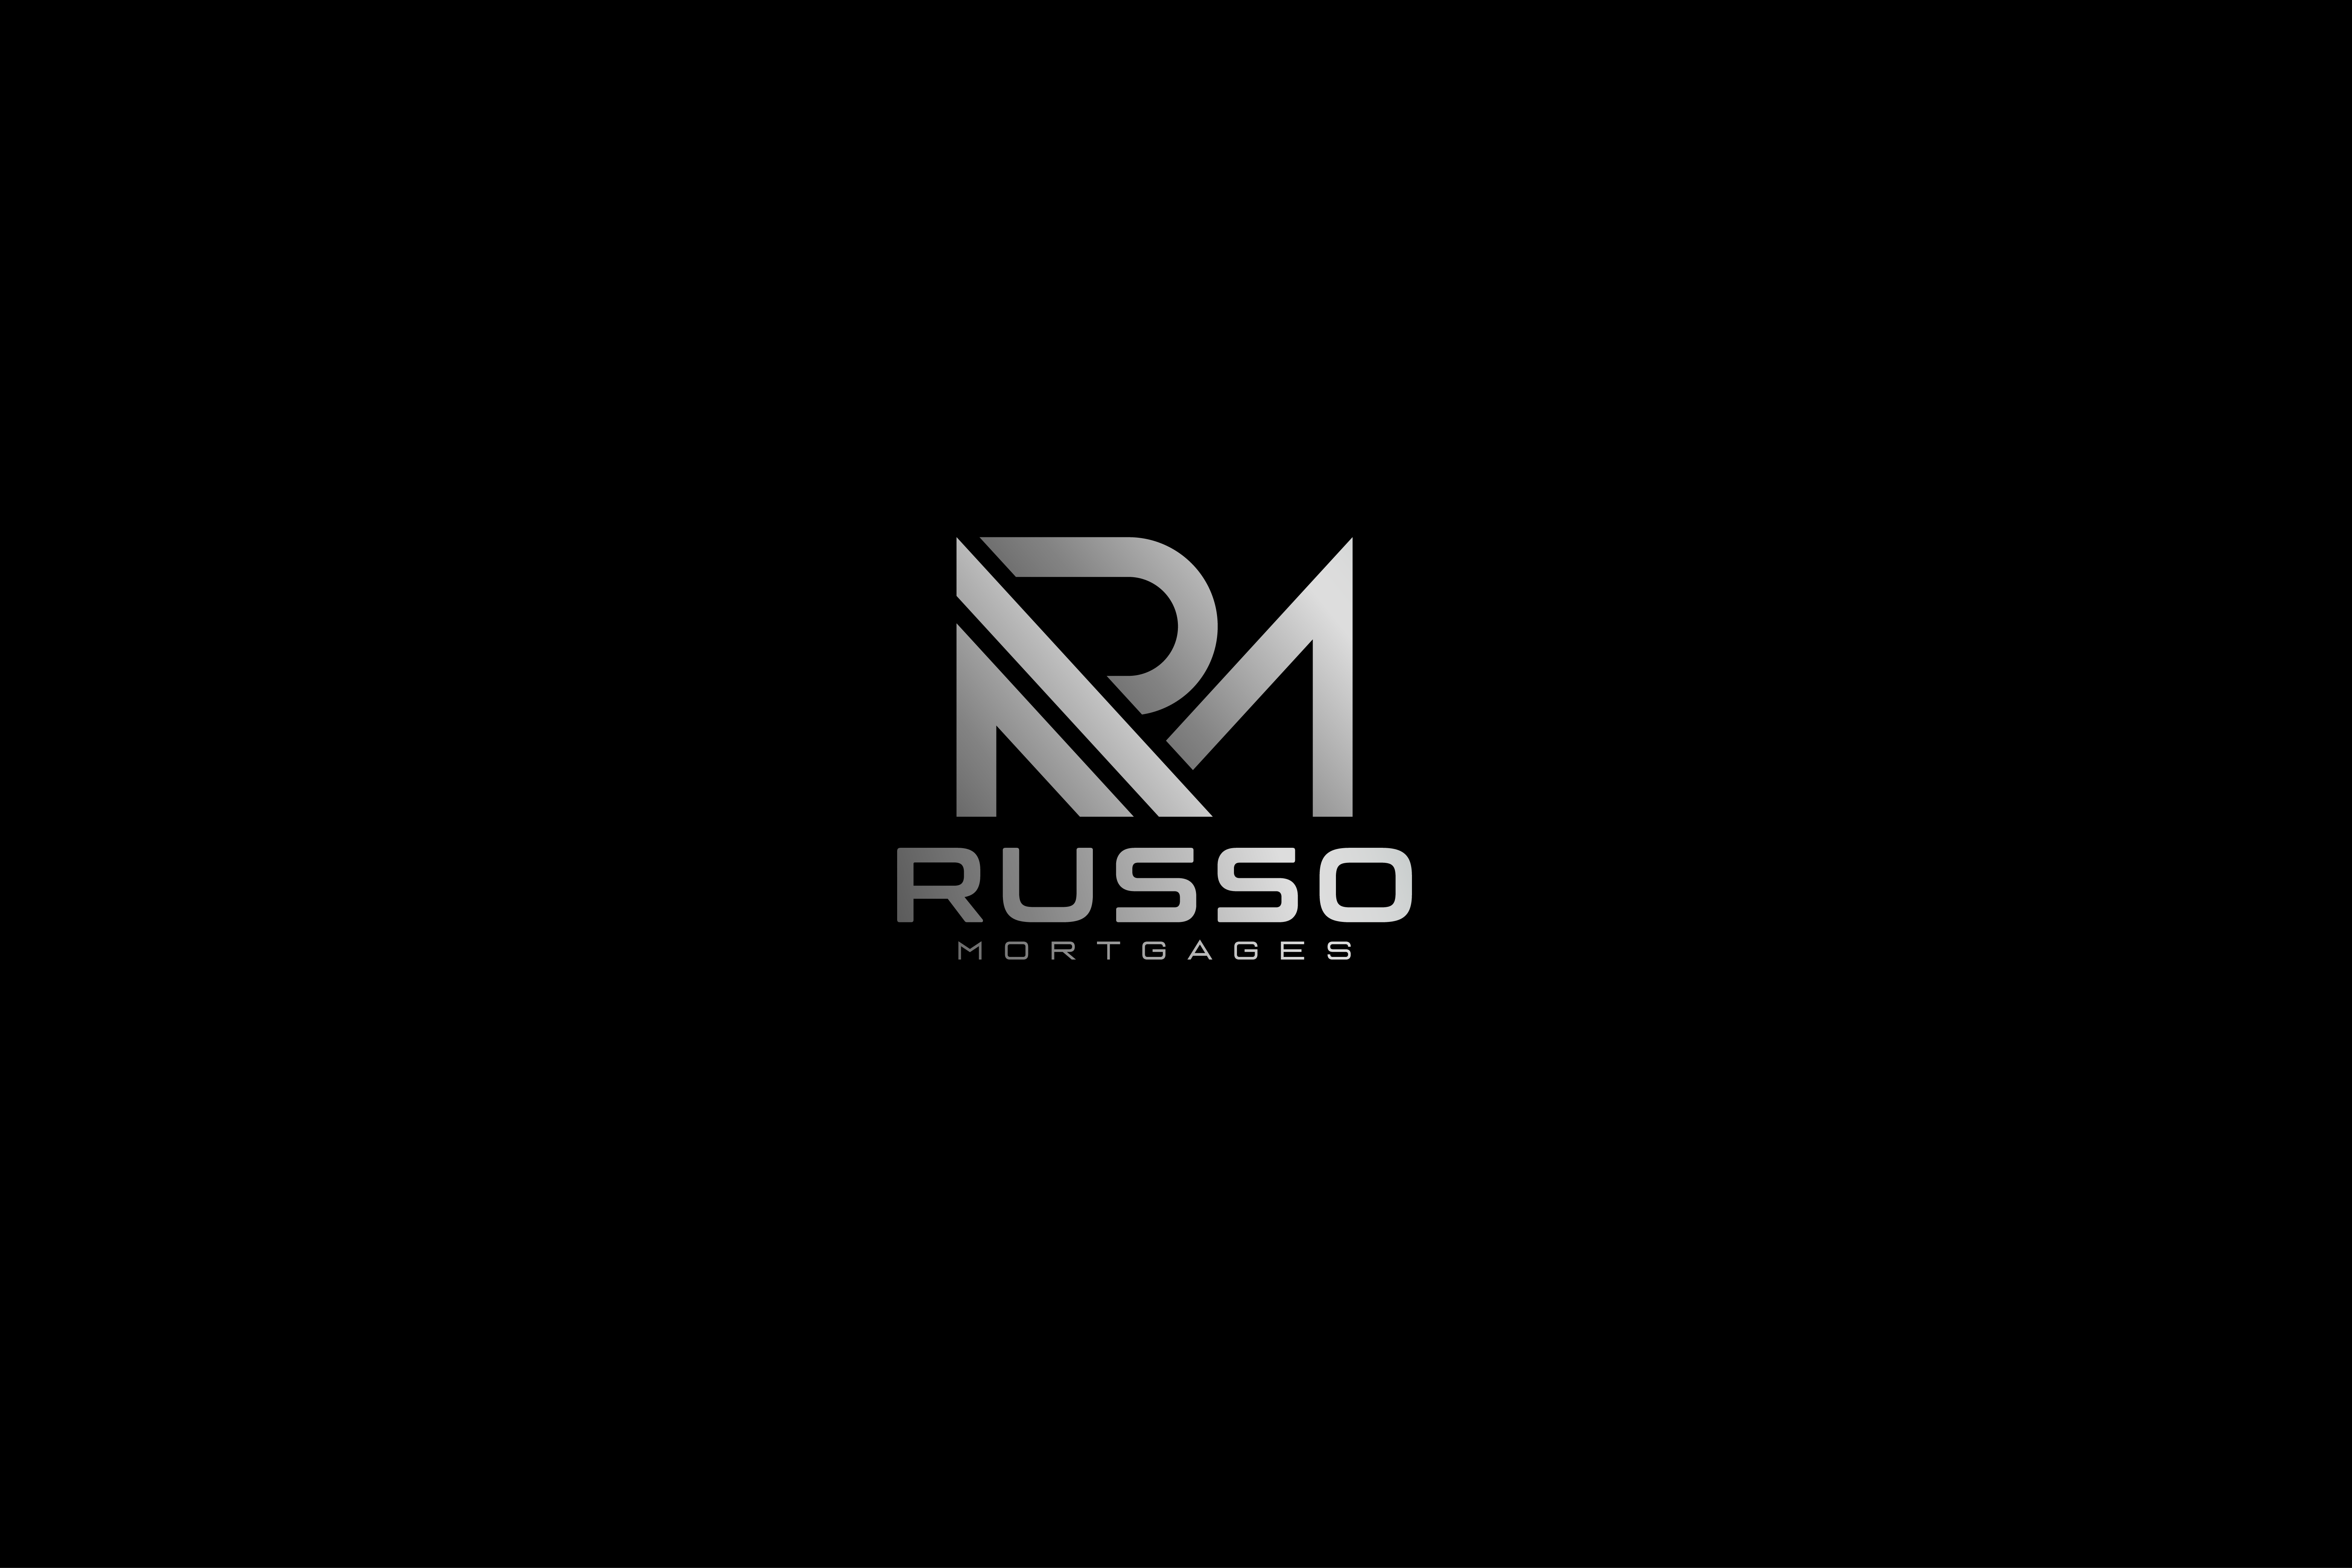 Russo Mortgages